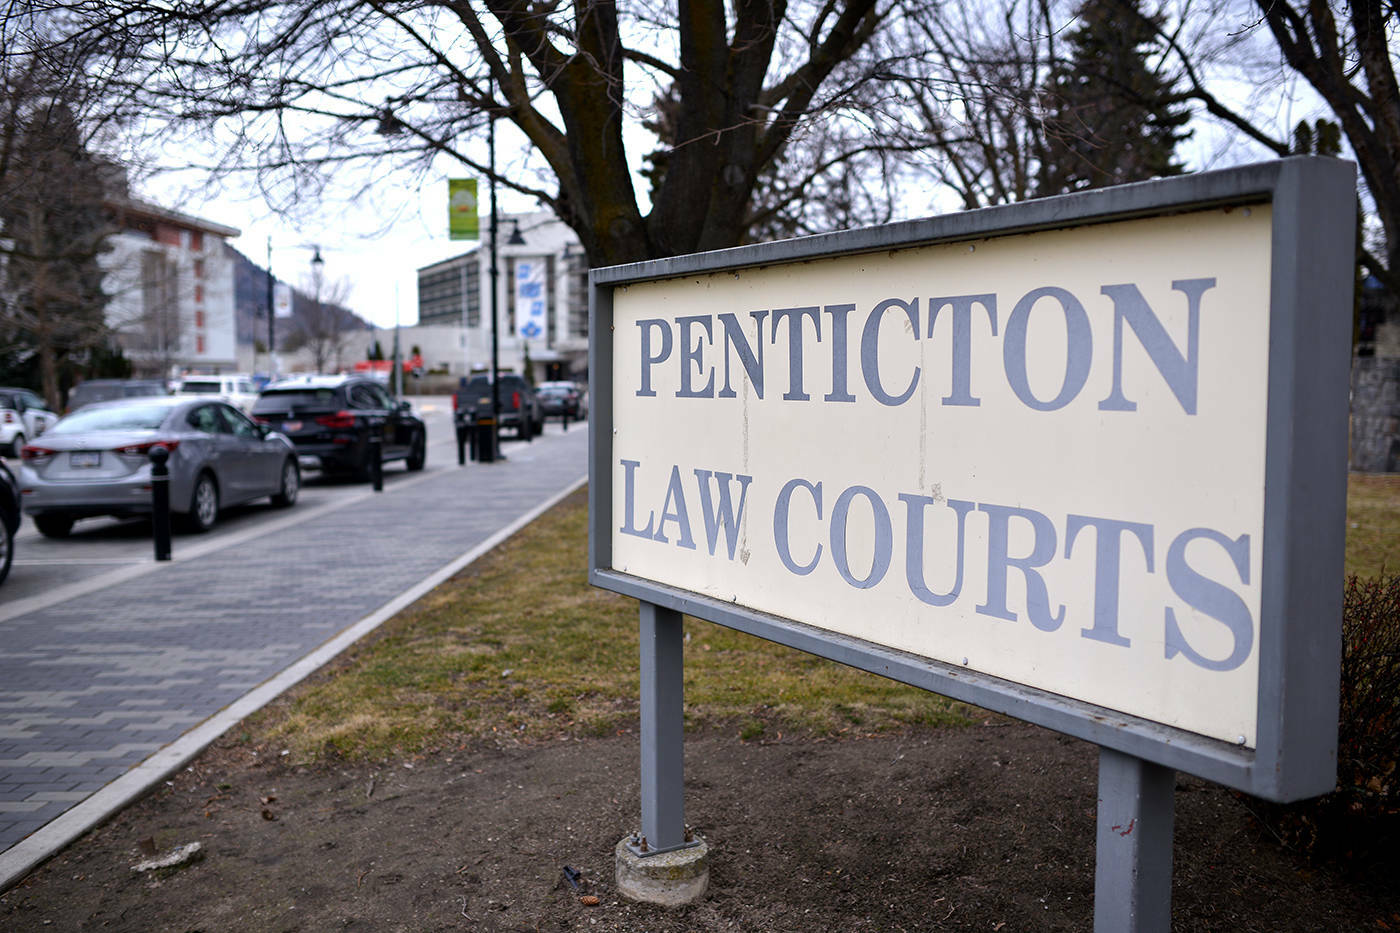 Penticton law courts were locked down for a short time Wenesday. (File photo)